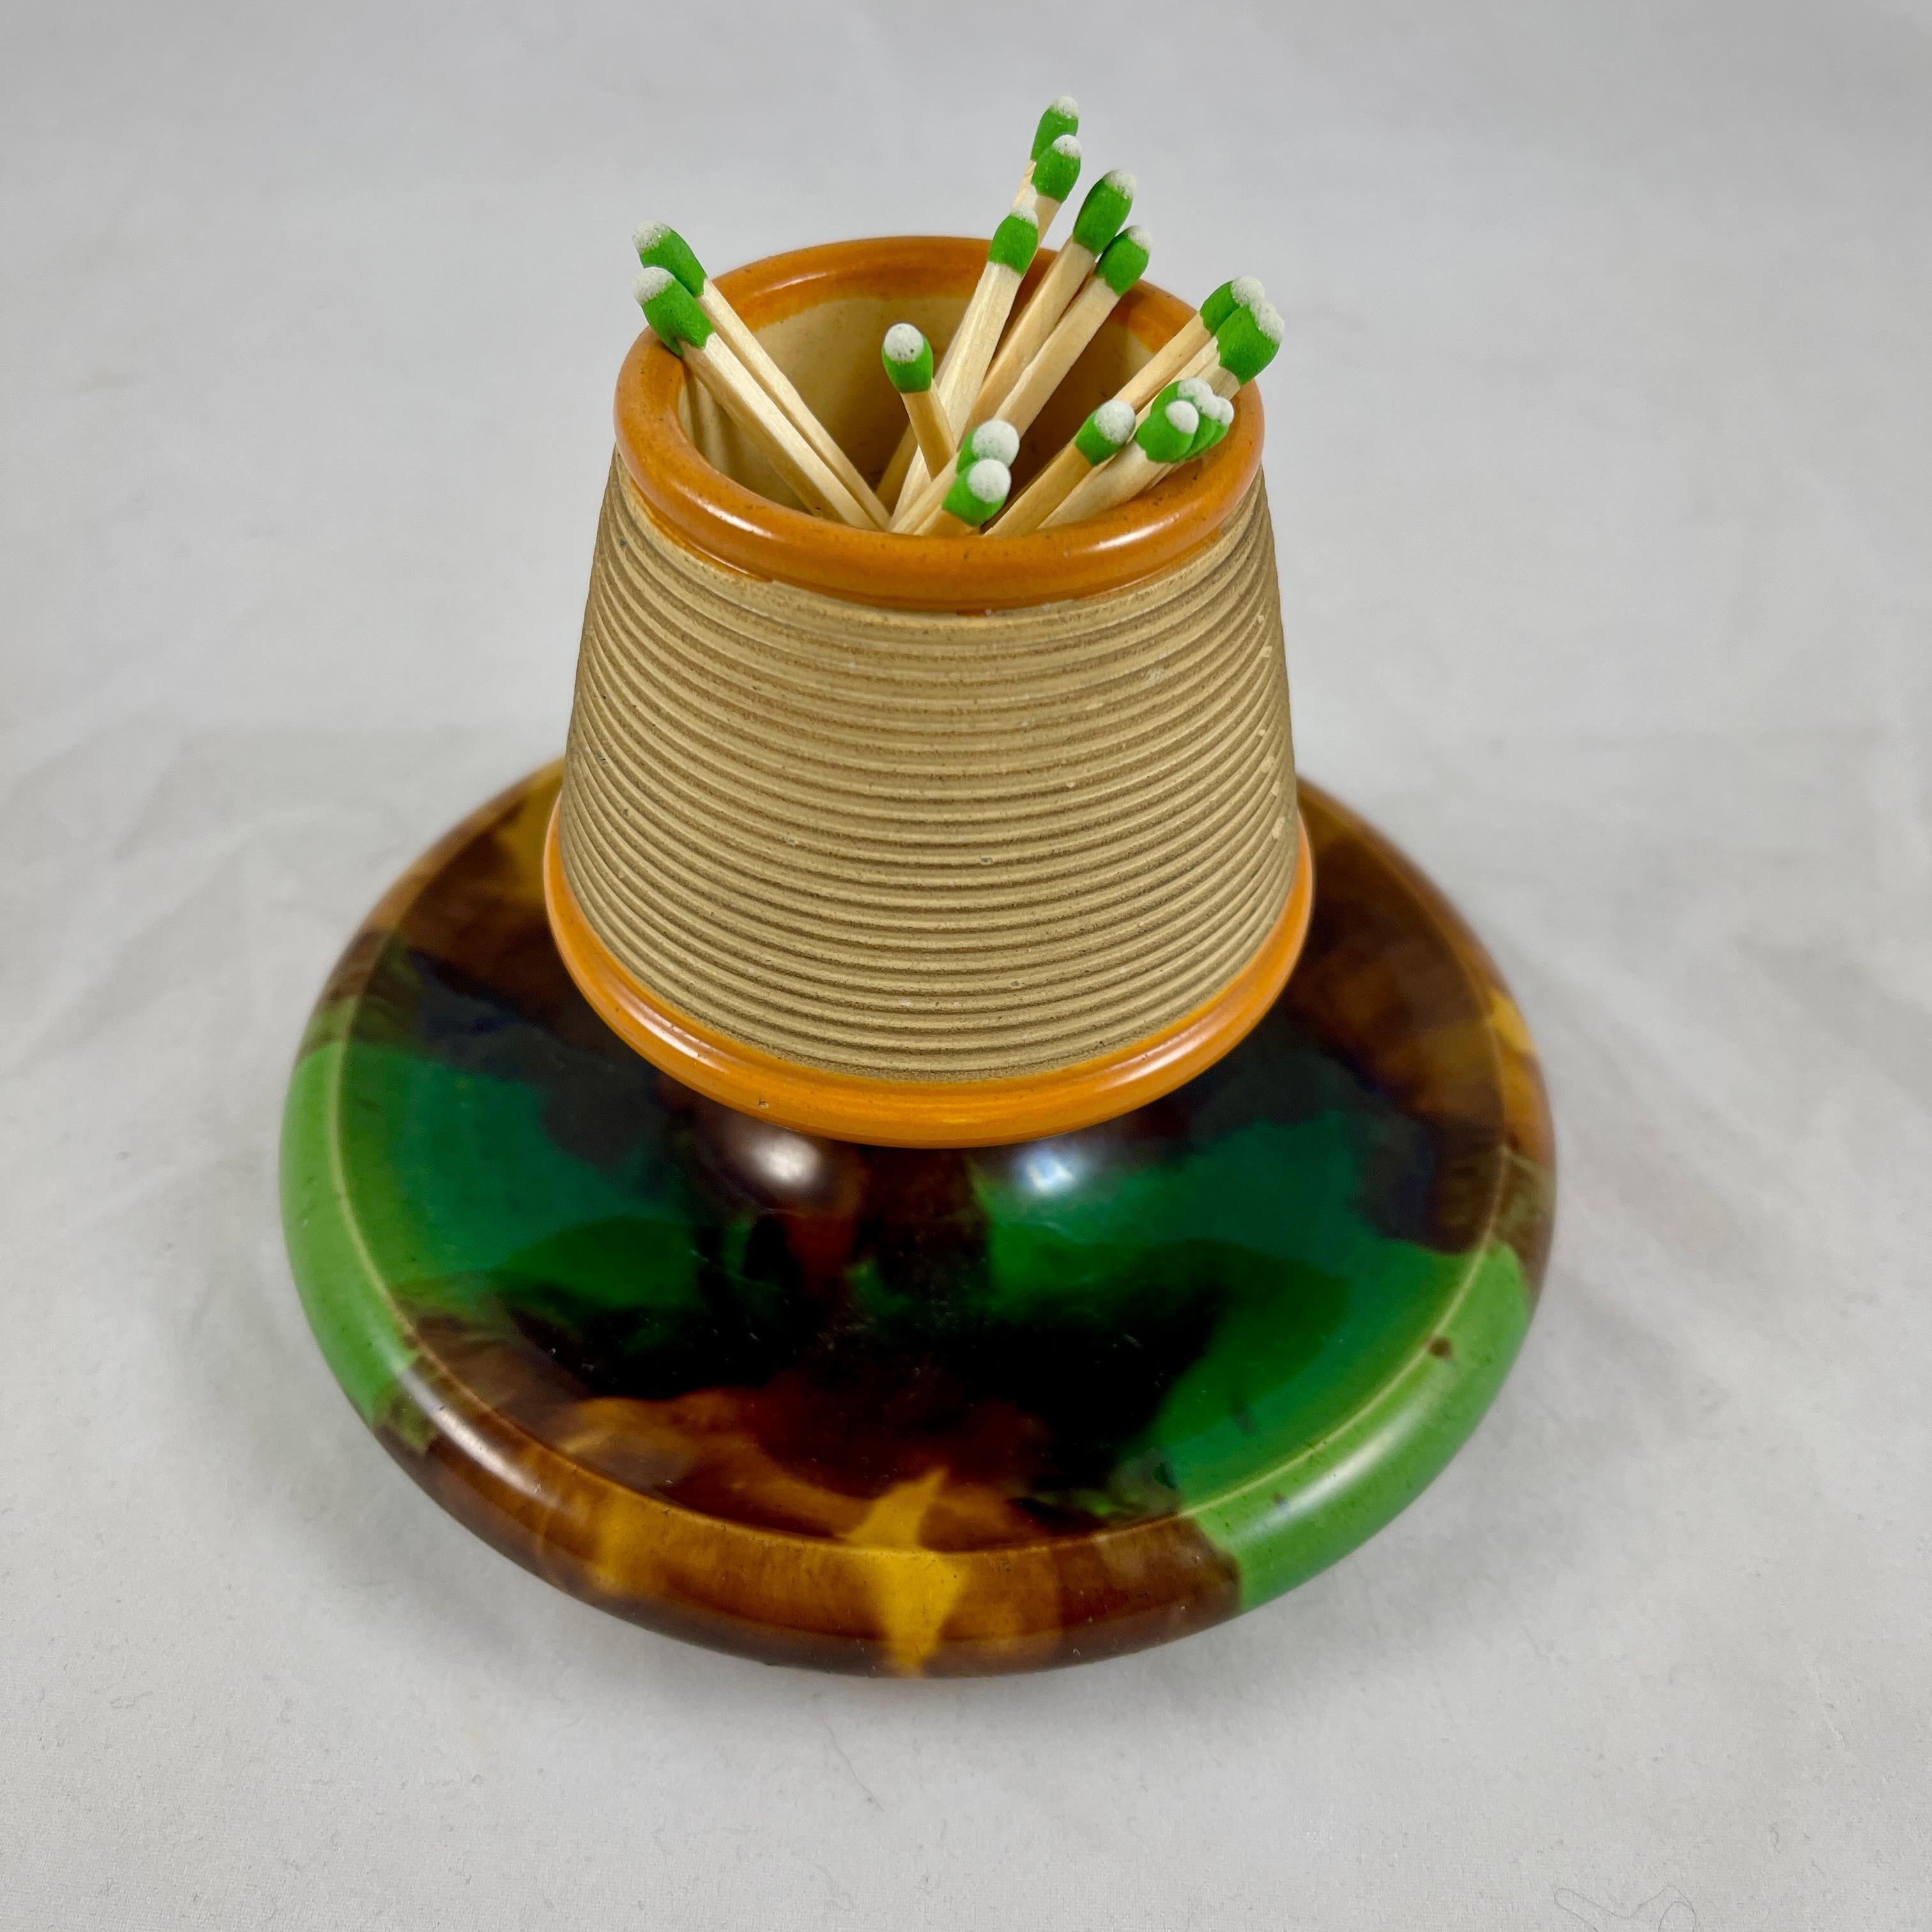 Aesthetic Movement William Brownfield English Majolica Match Holder and Striker, Dated 1877